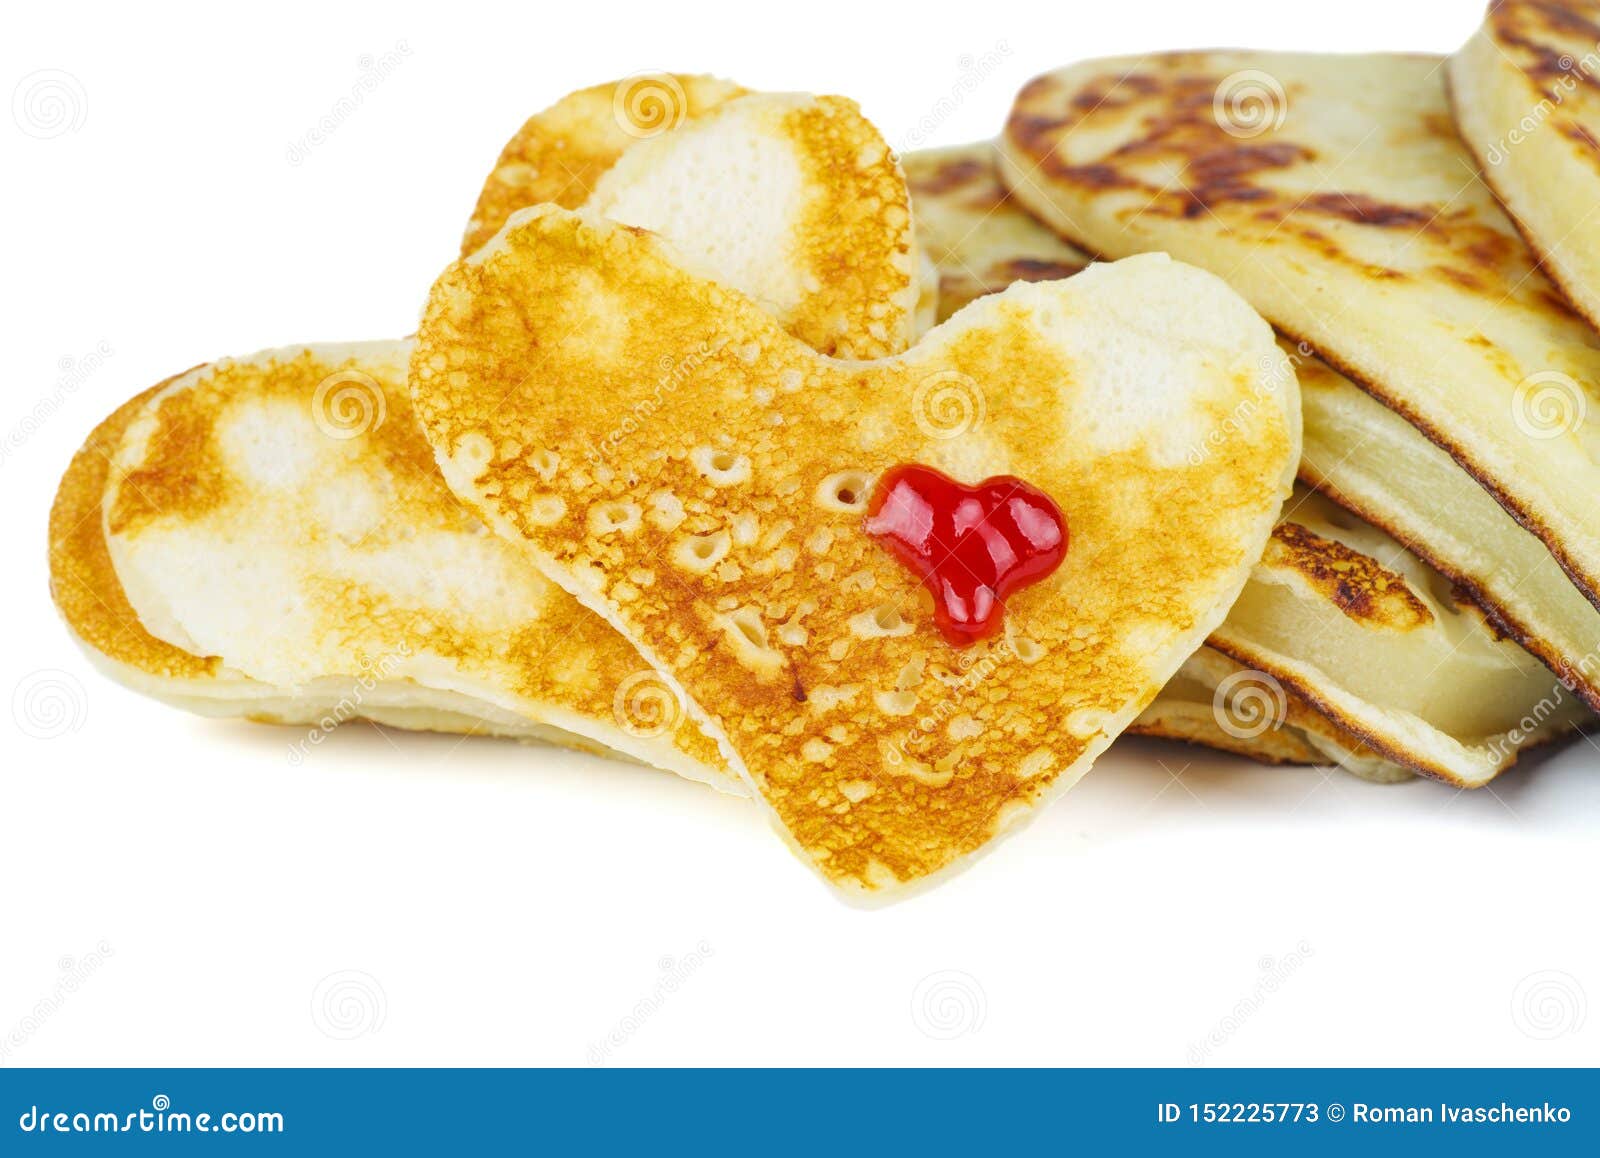 Heart shaped pancakes stock image. Image of stack, syrup - 152225773